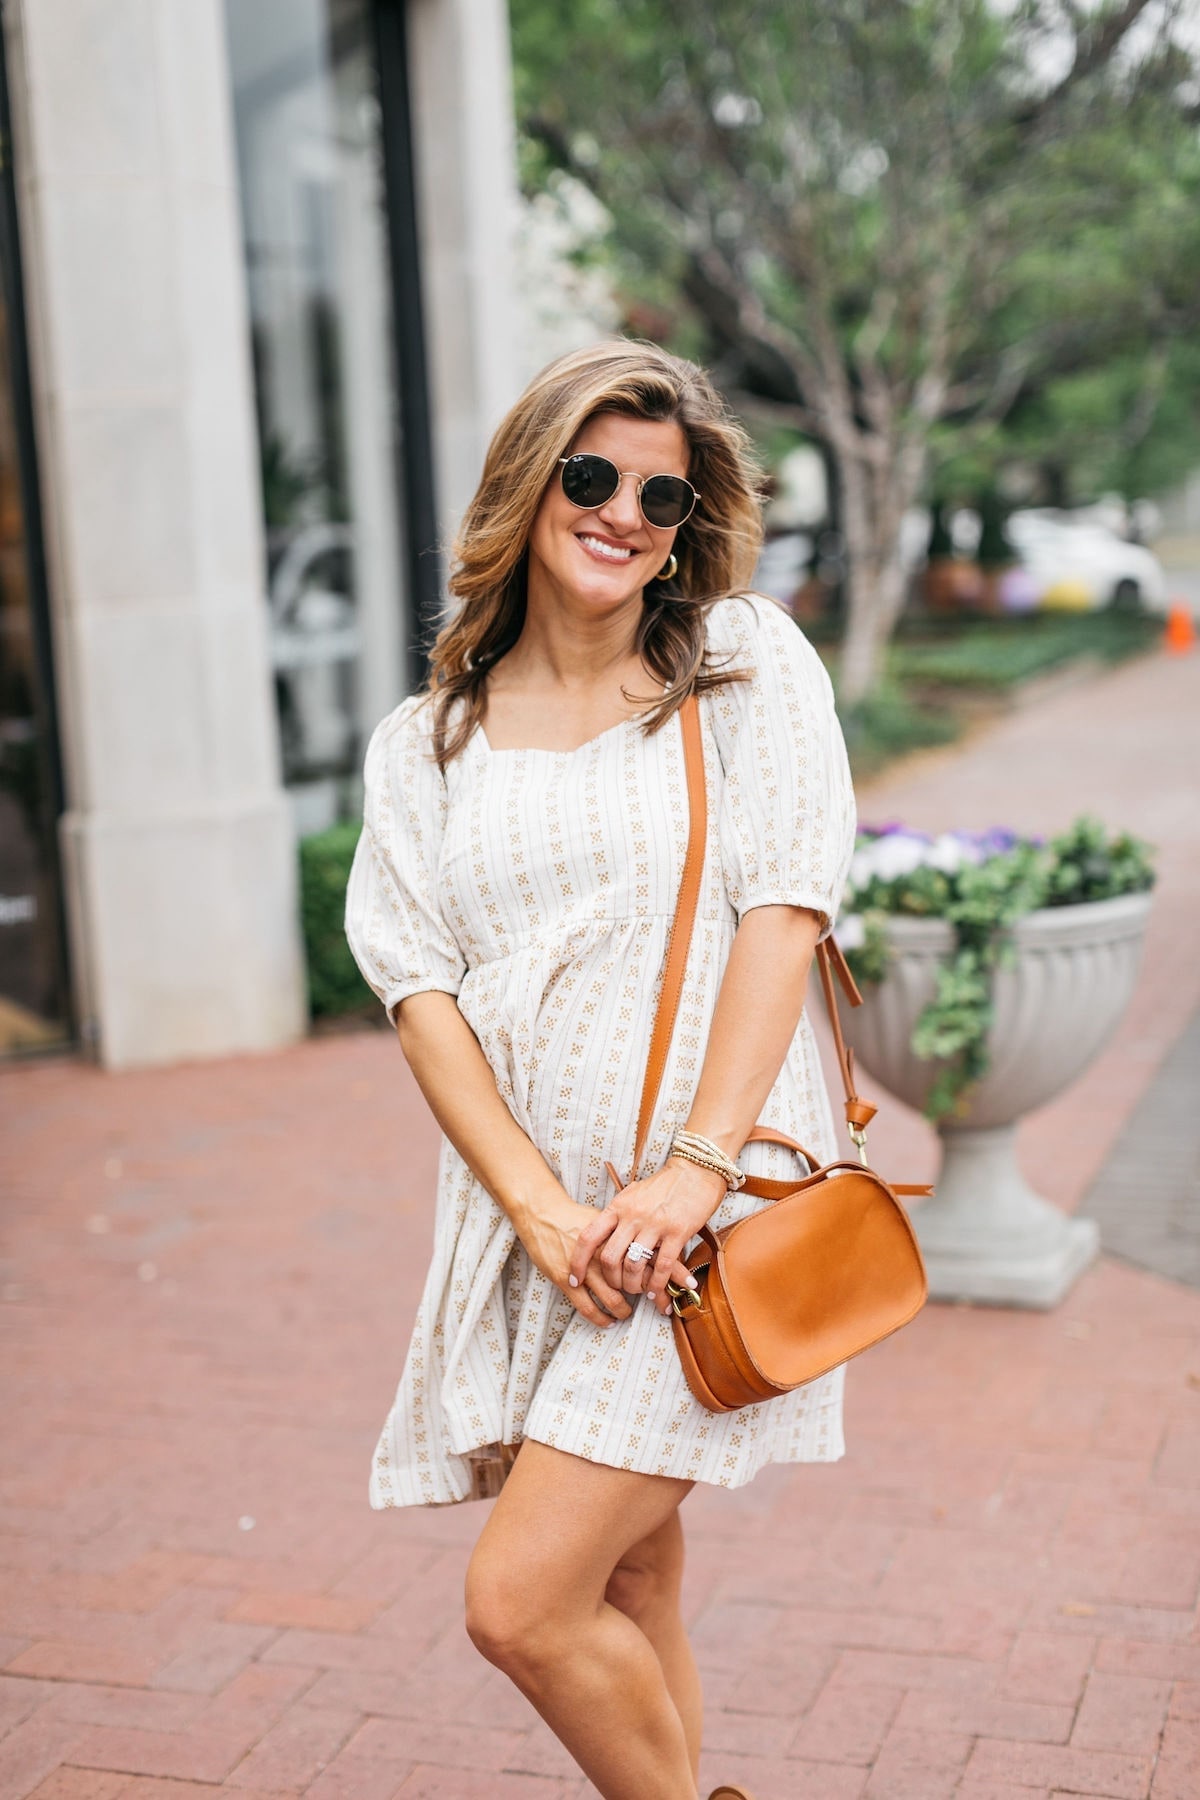 Brighton Butler wearing madewell dress and sandals